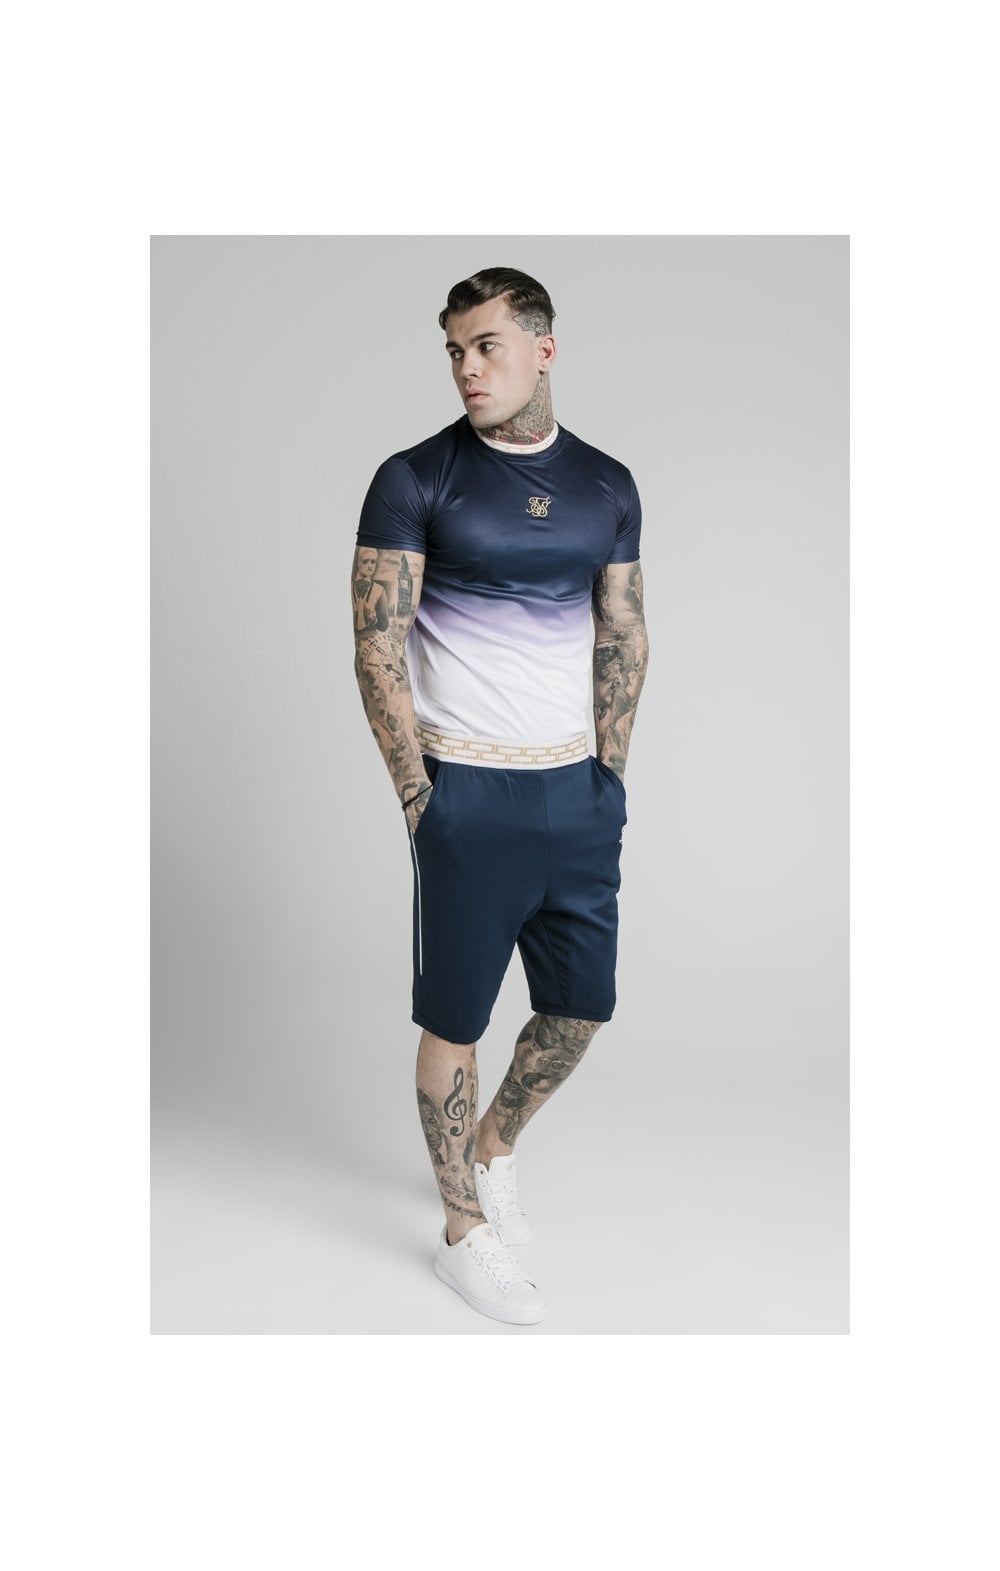 SikSilk S/S Fade Inset Tape Gym Tee - Navy & White (3)